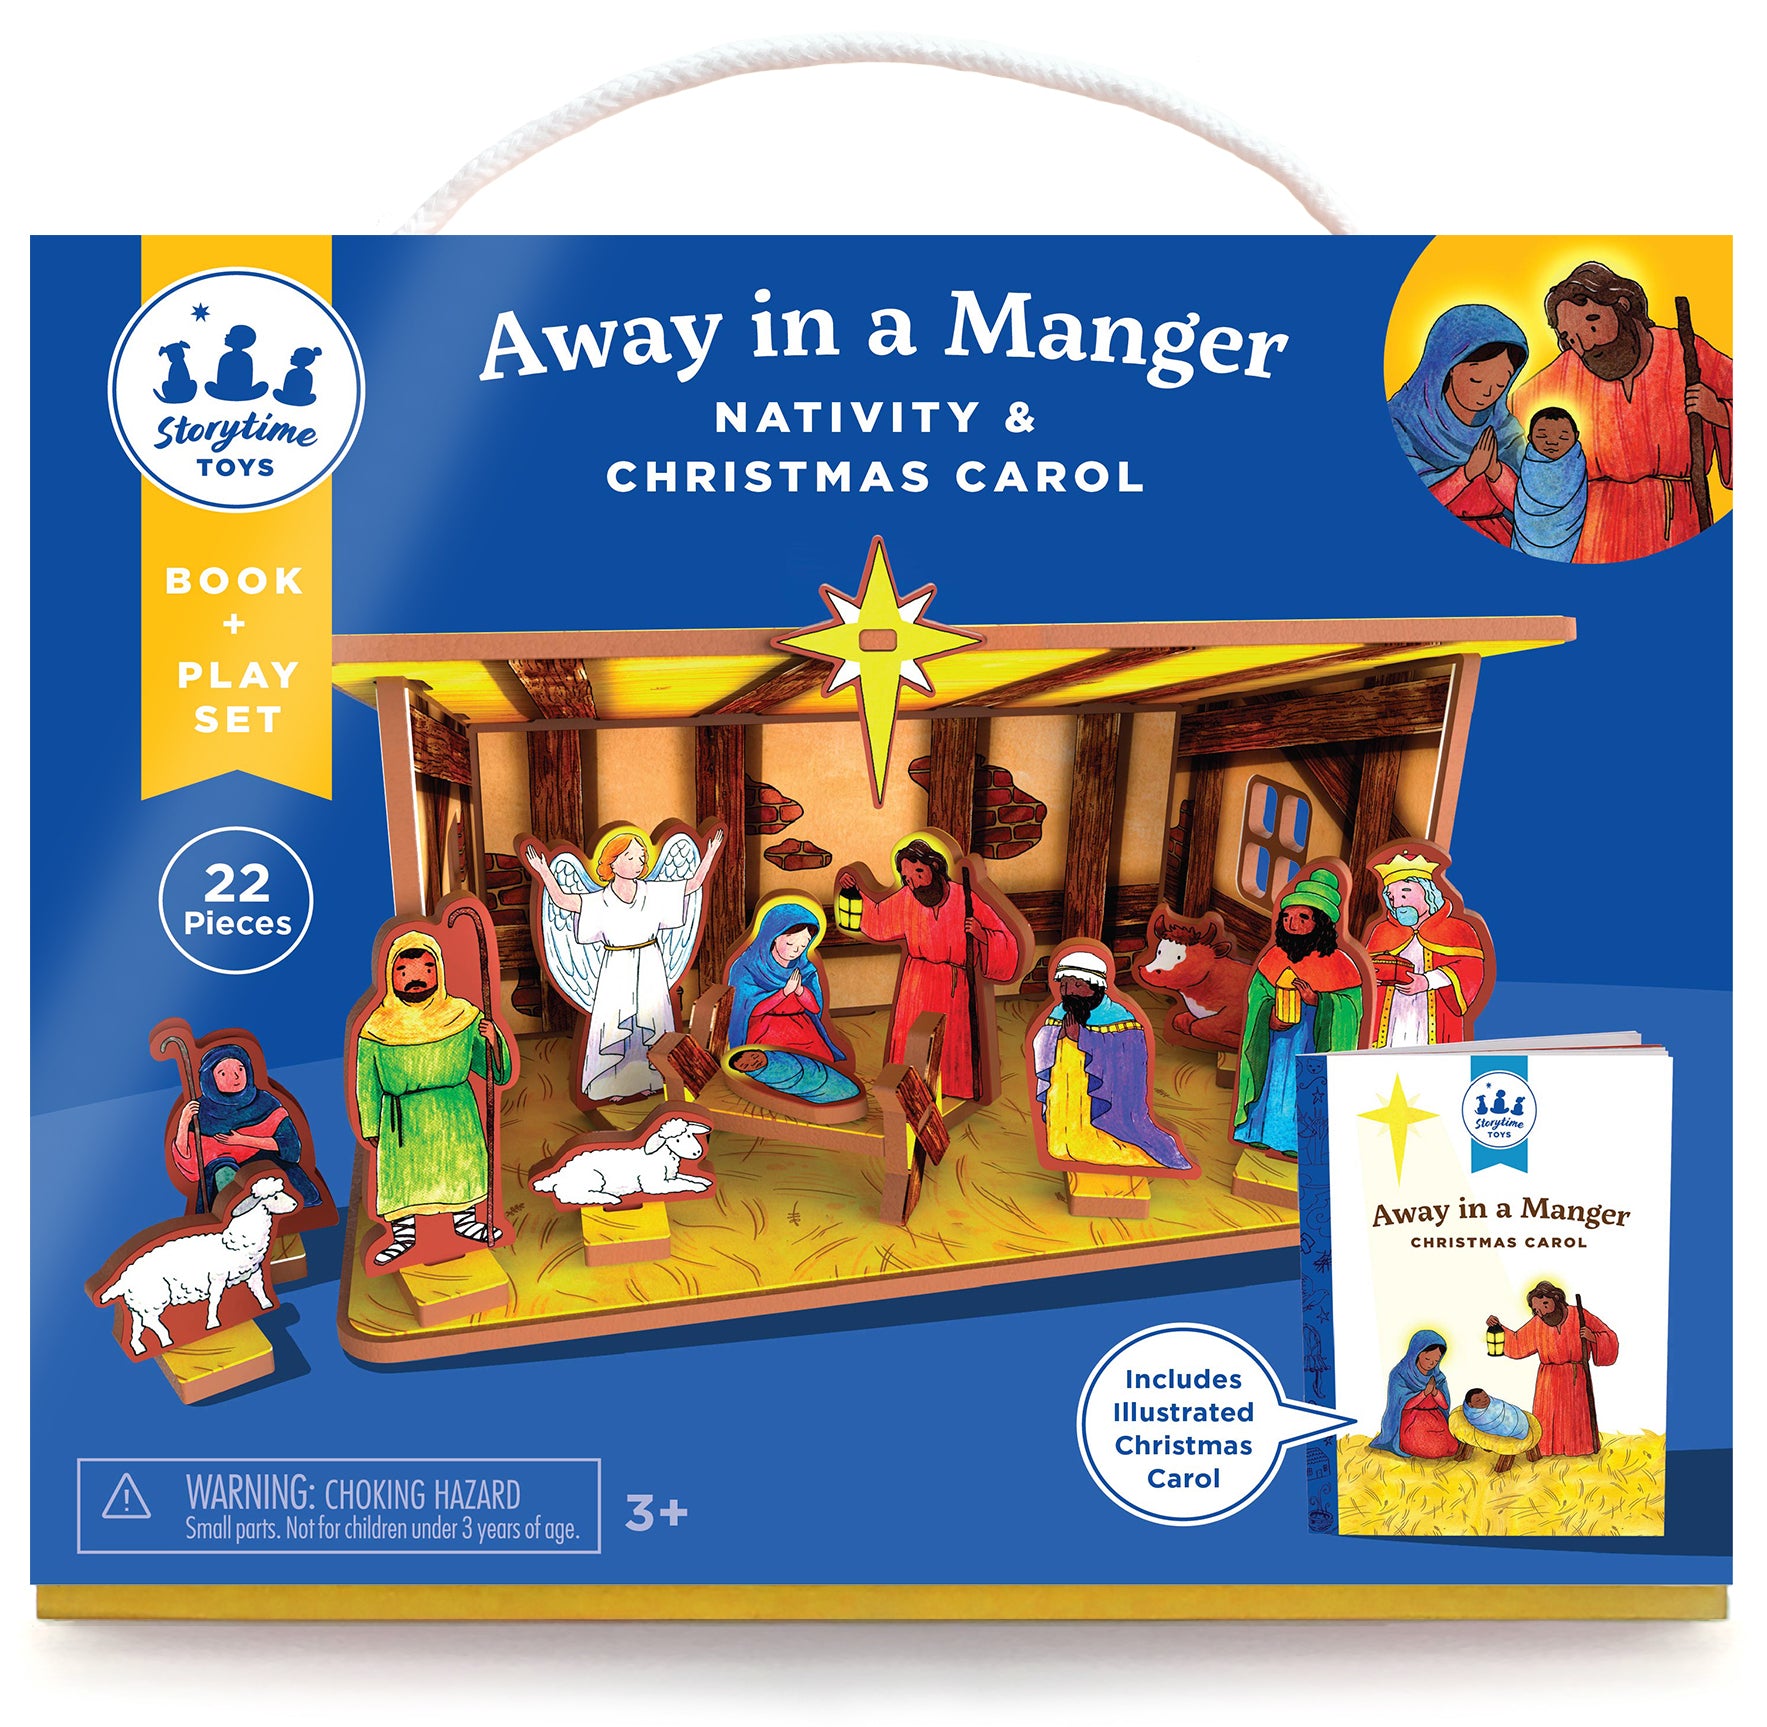 nativity pictures for children